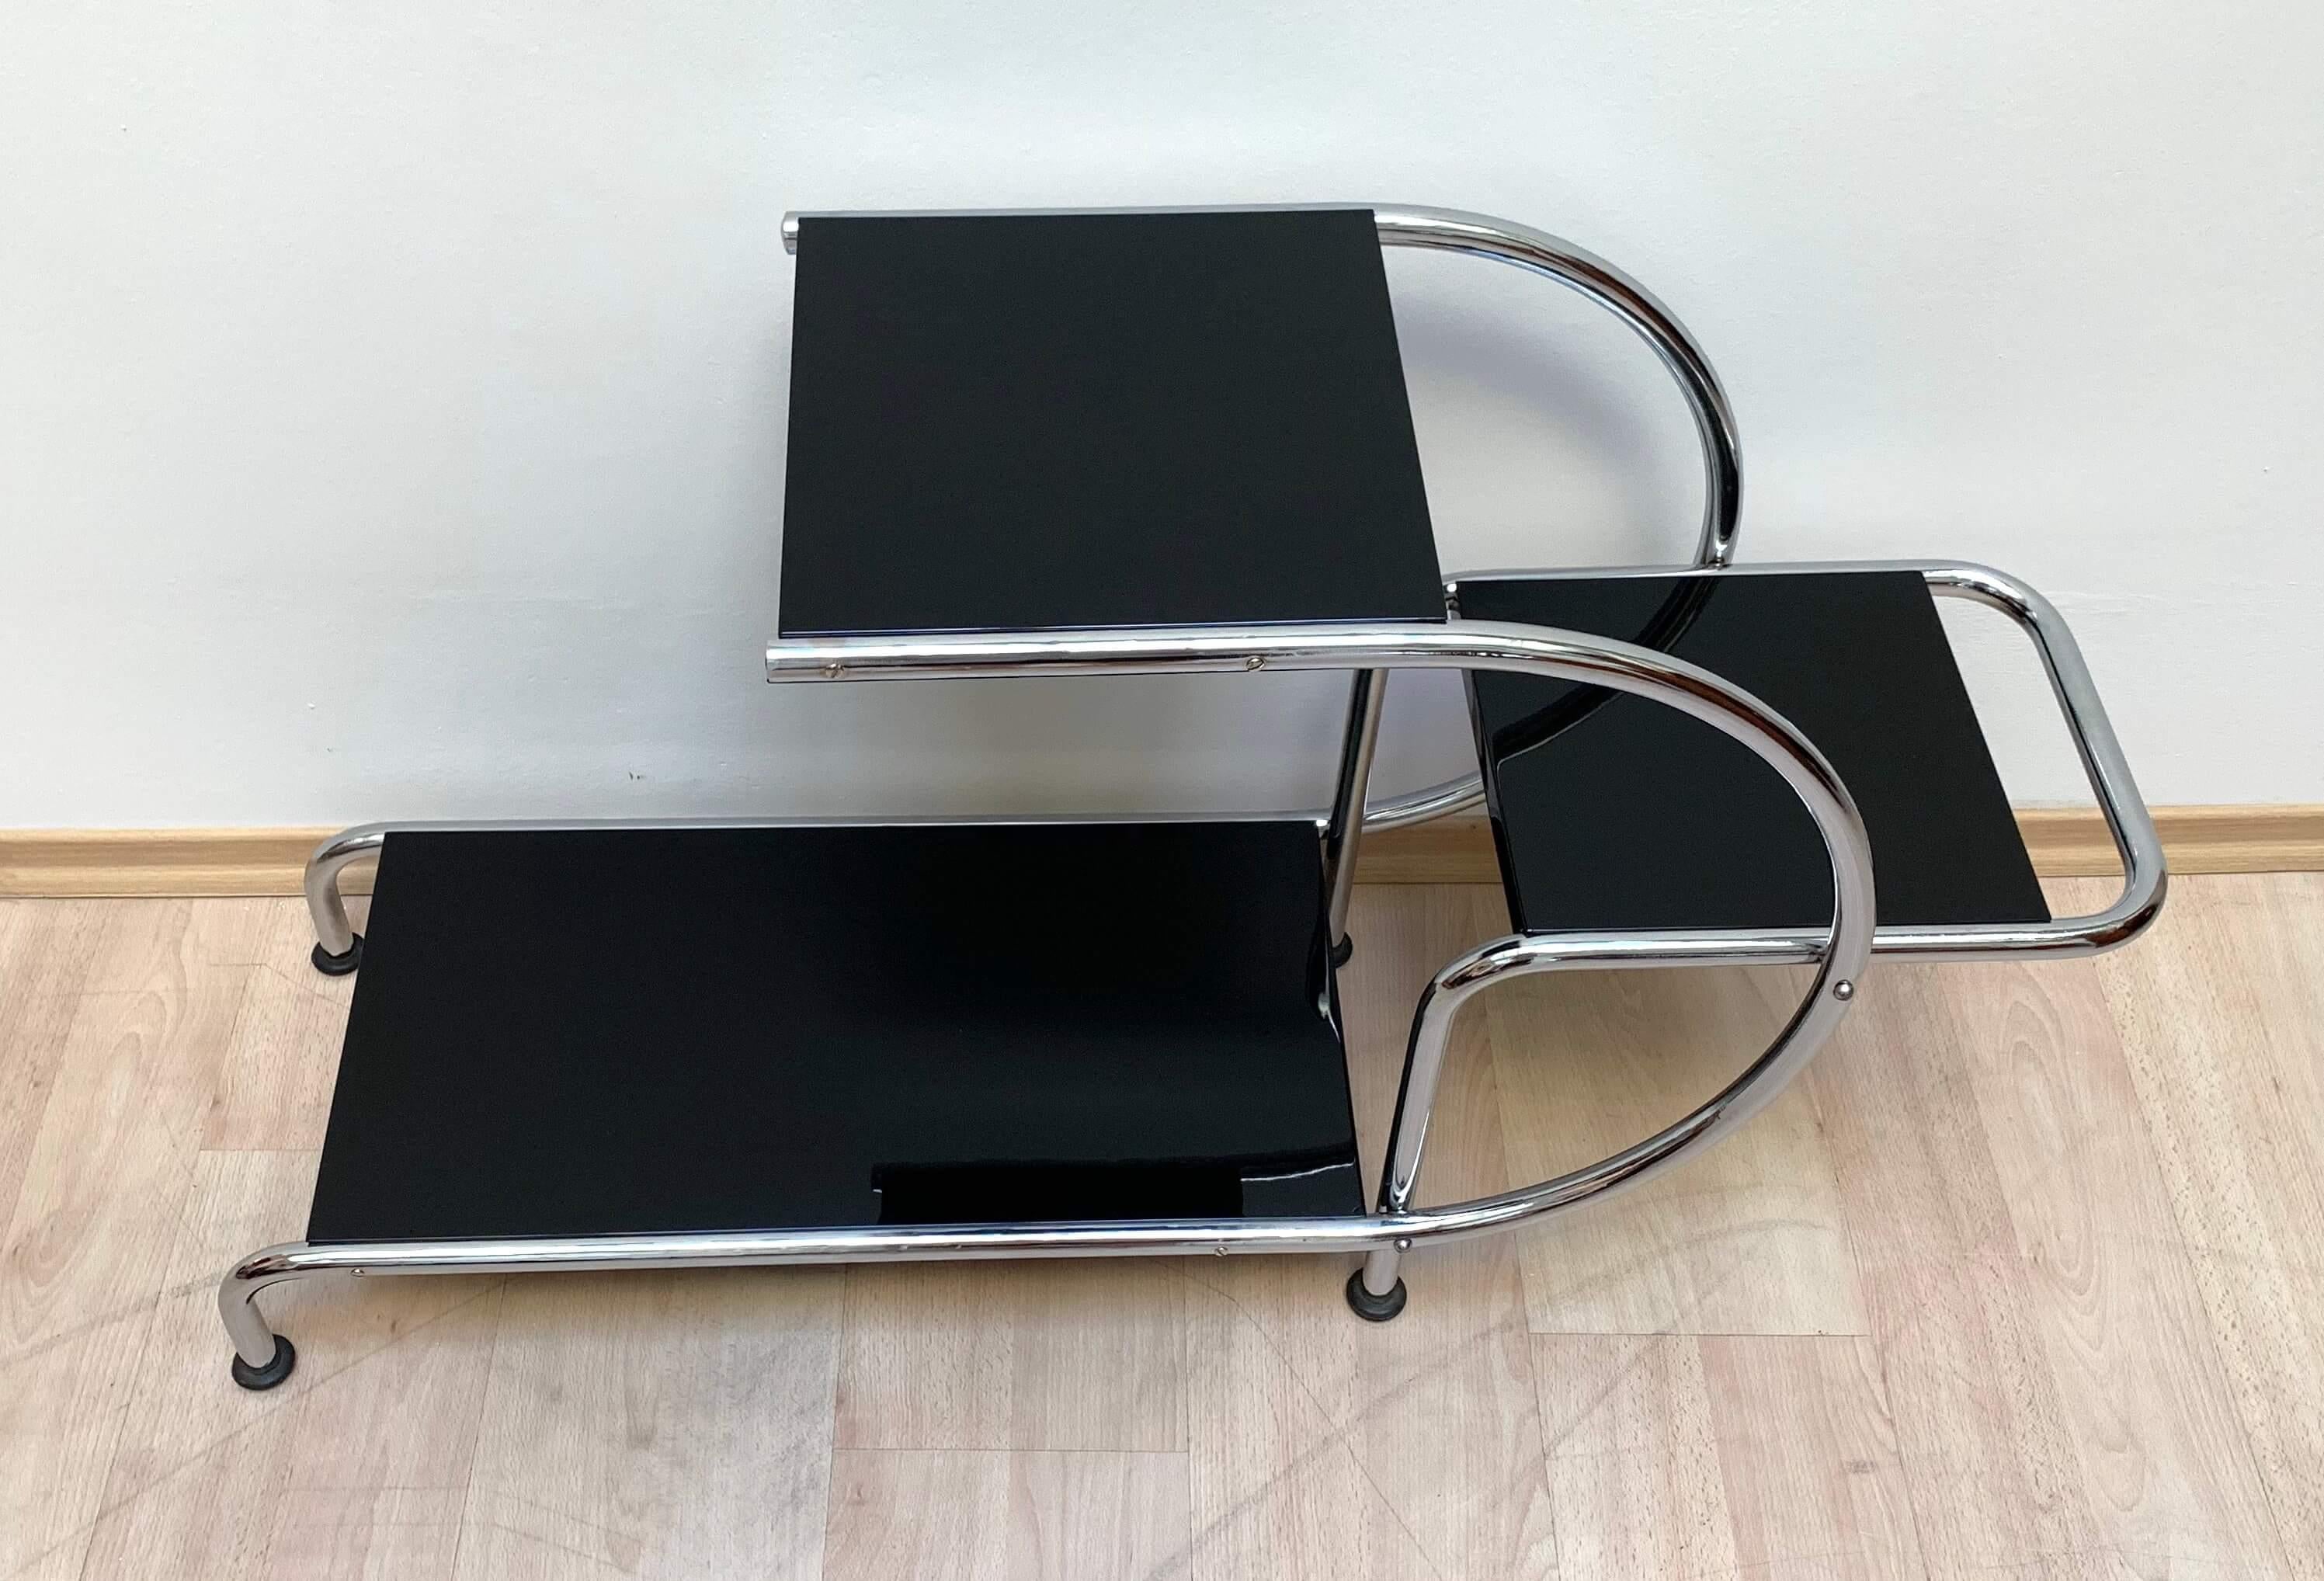 Bauhaus Steeltube étagère / side table by Emile Guyot from Germany or former Czechoslovakia, circa 1930. Original furniture from the 1930s, excellently restored.
Newly galvanized / nickel-plated steeltubes and screws and new black piano lacquer on